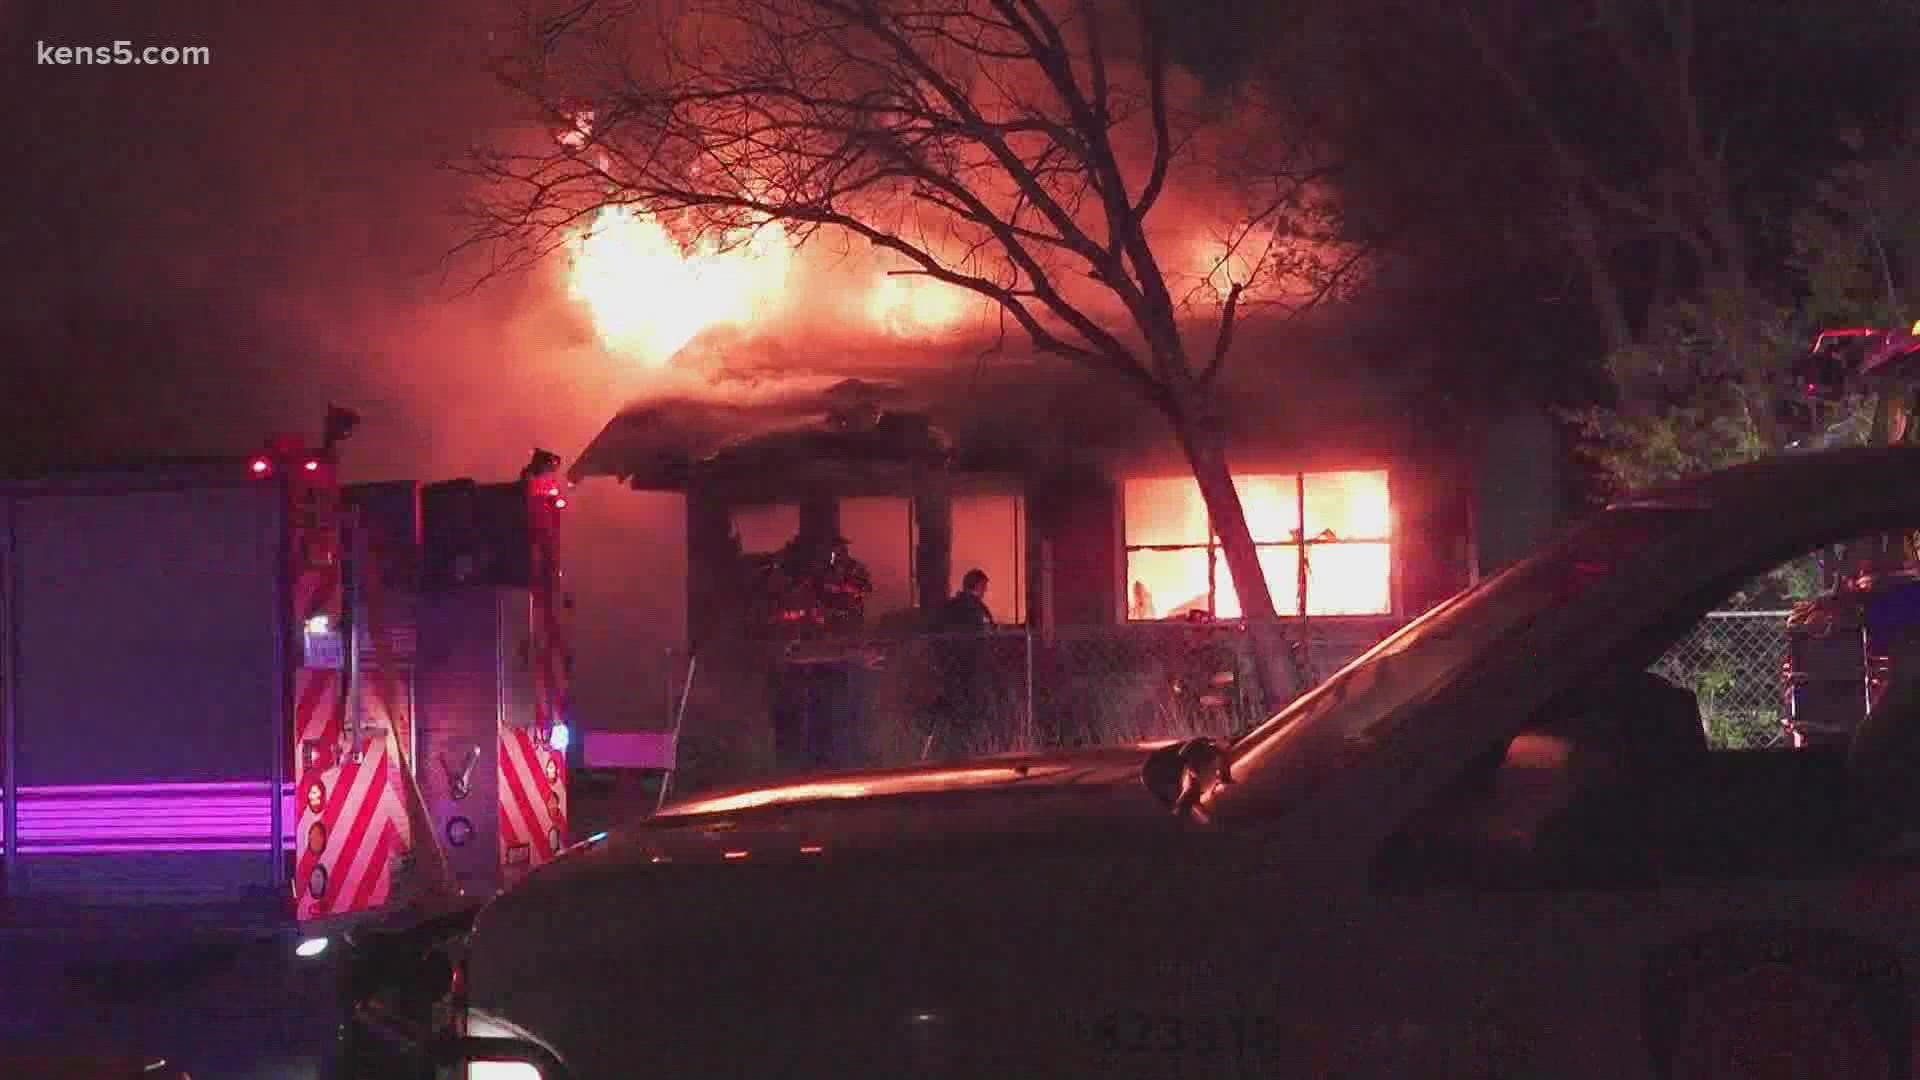 The San Antonio Fire Department said the abandoned home was fully engulfed in flames when crews arrived around 3:30 a.m.